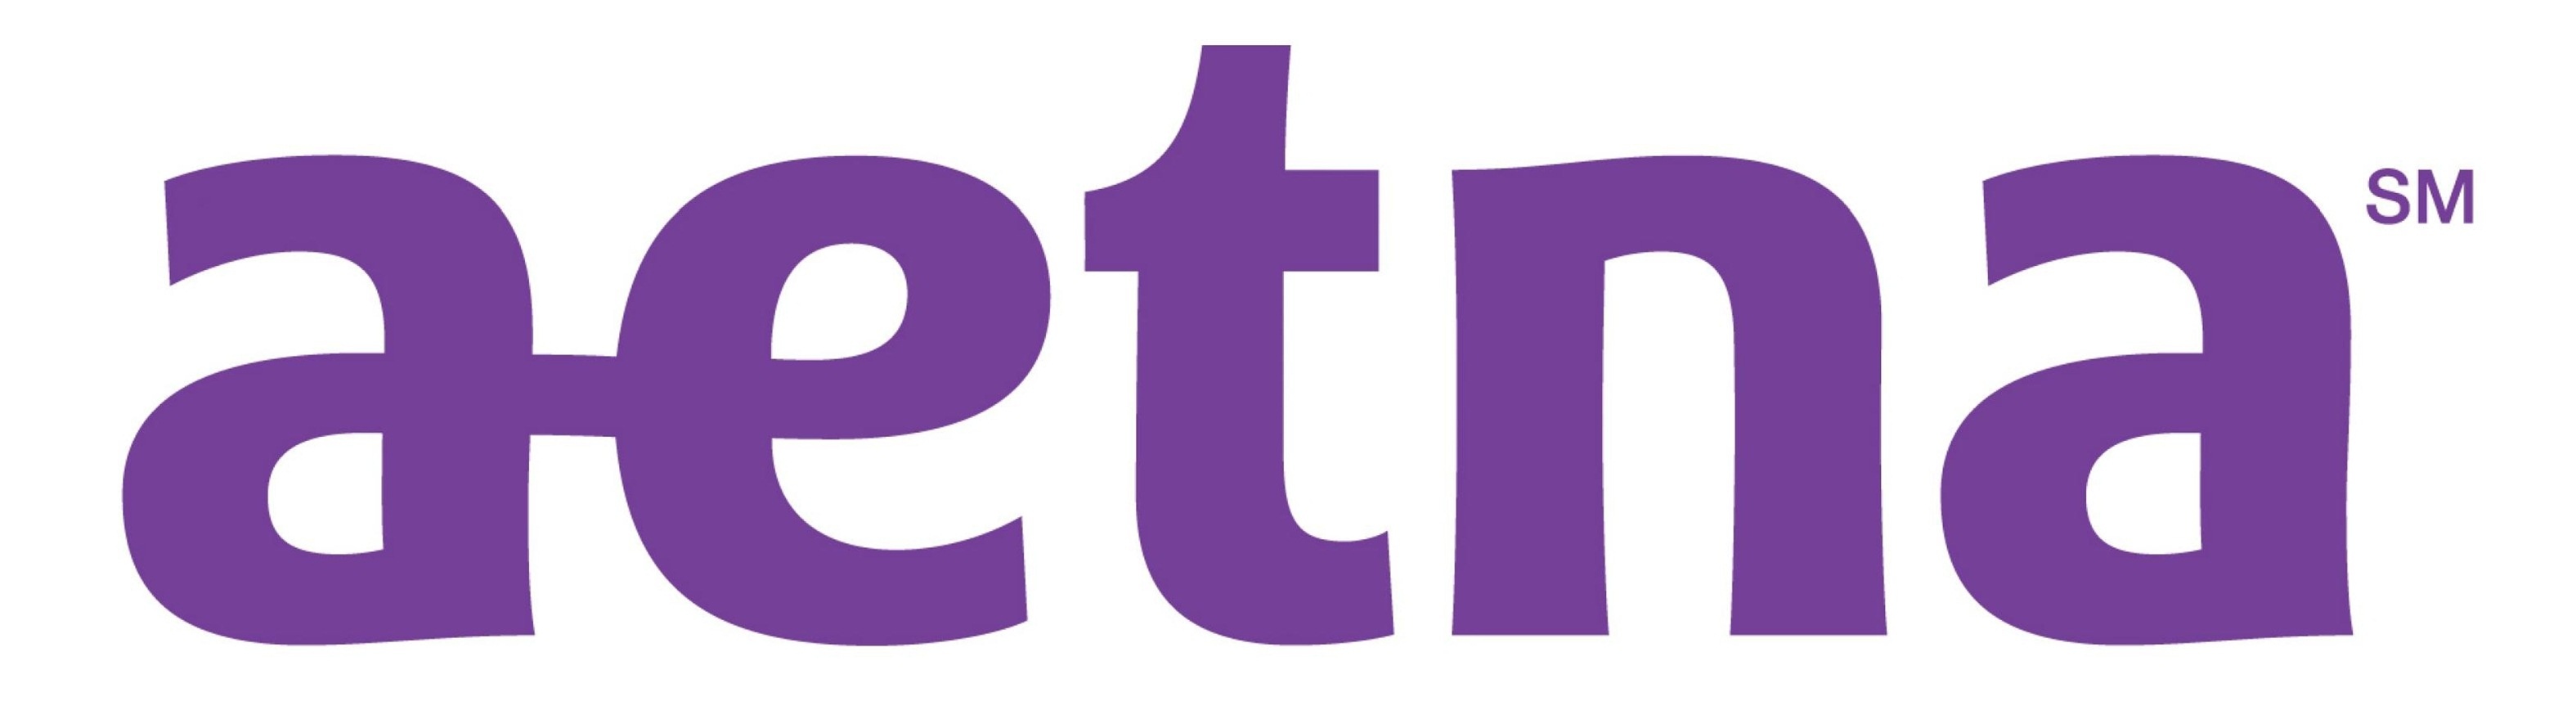 aetna timely filing 2020